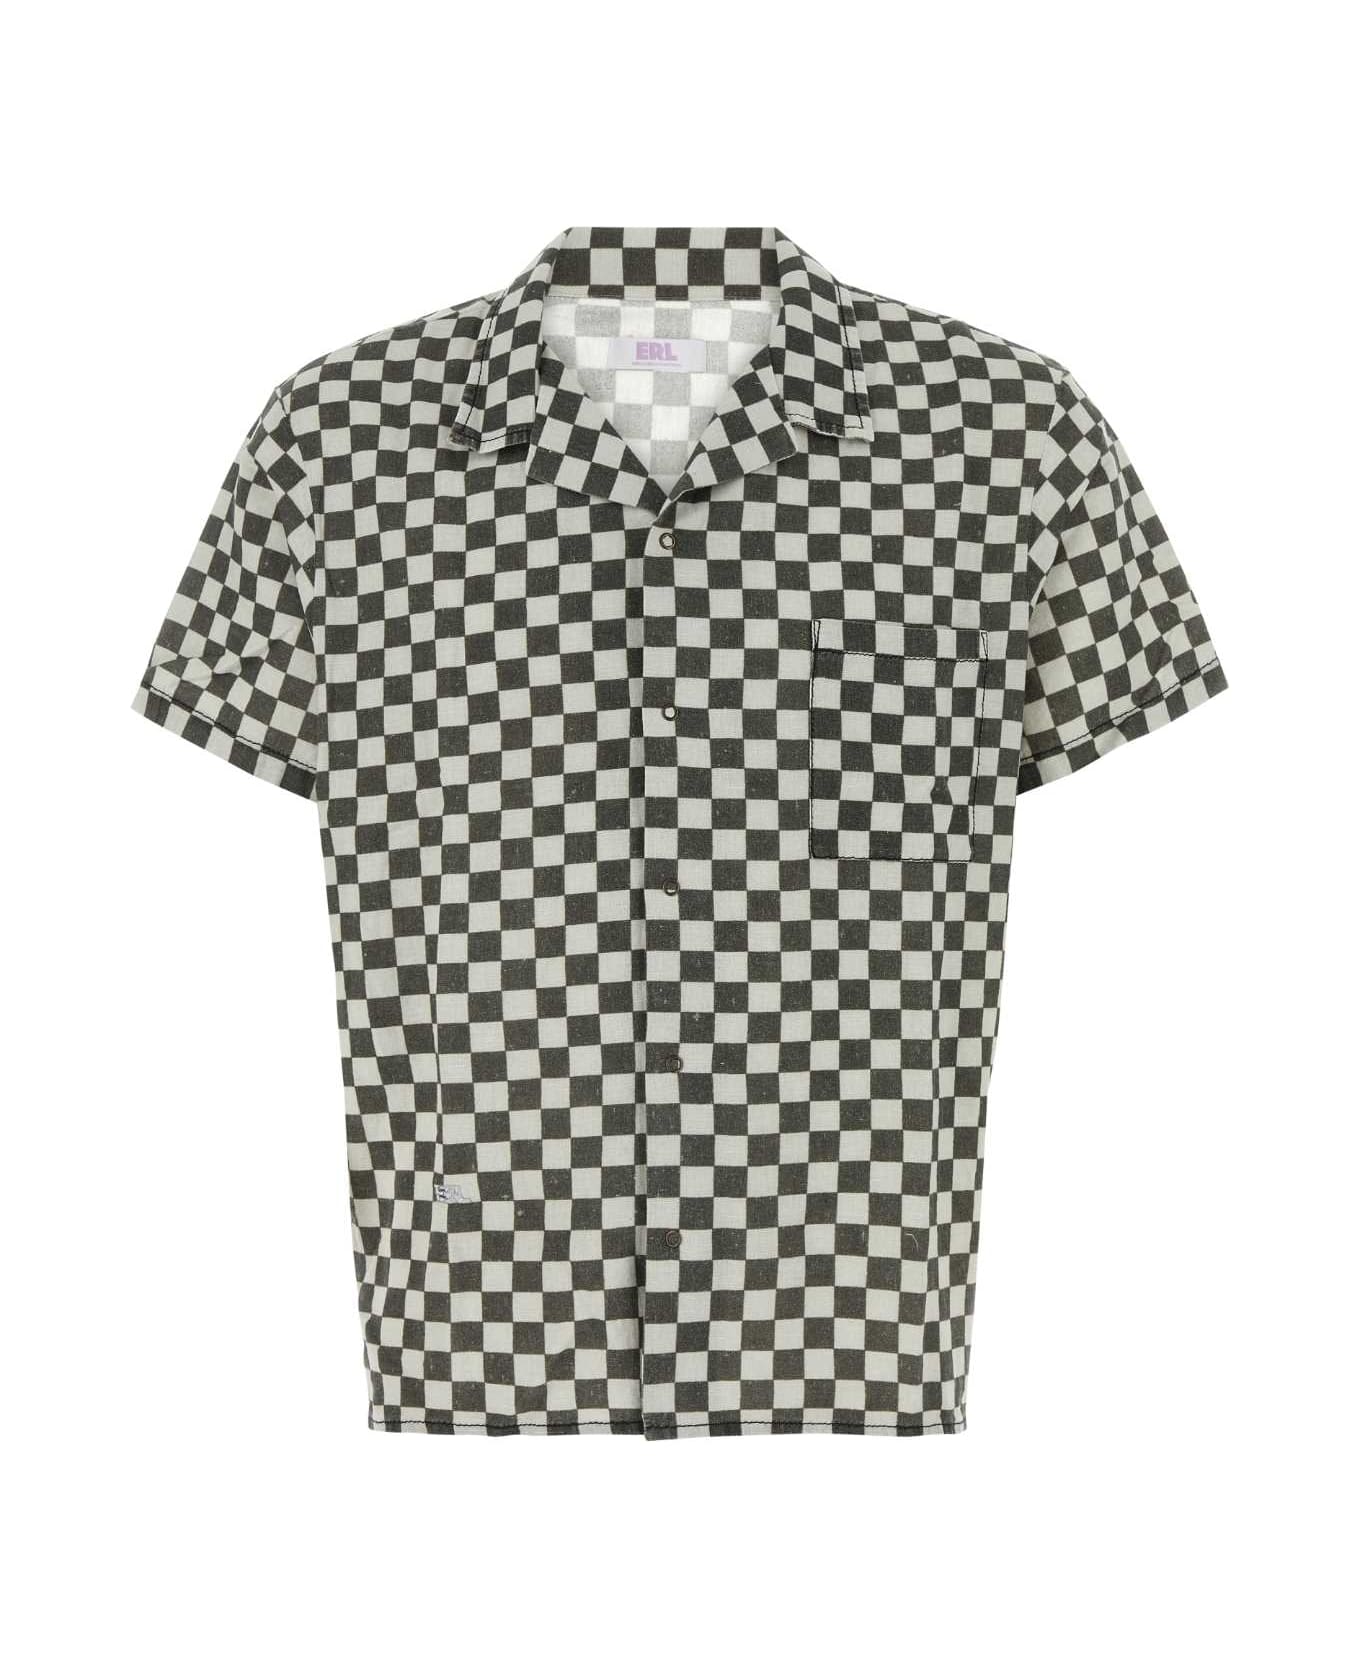 ERL Printed Cotton And Linen Shirt - CHECKER シャツ